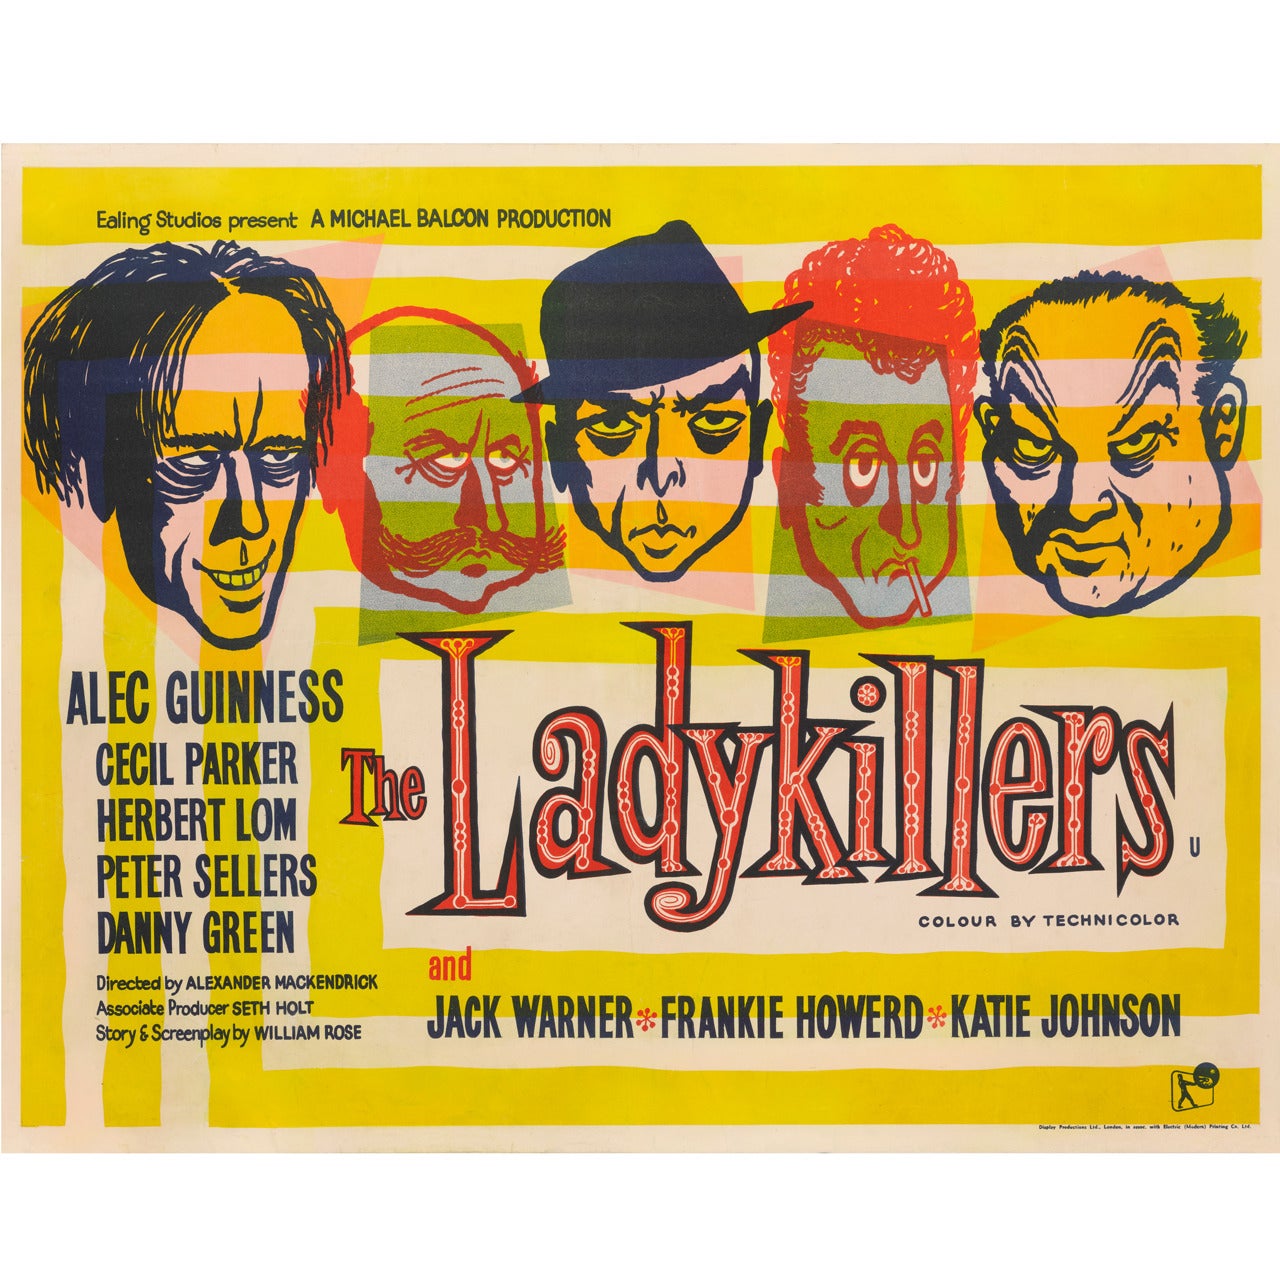 Film Poster for, "The Ladykillers"